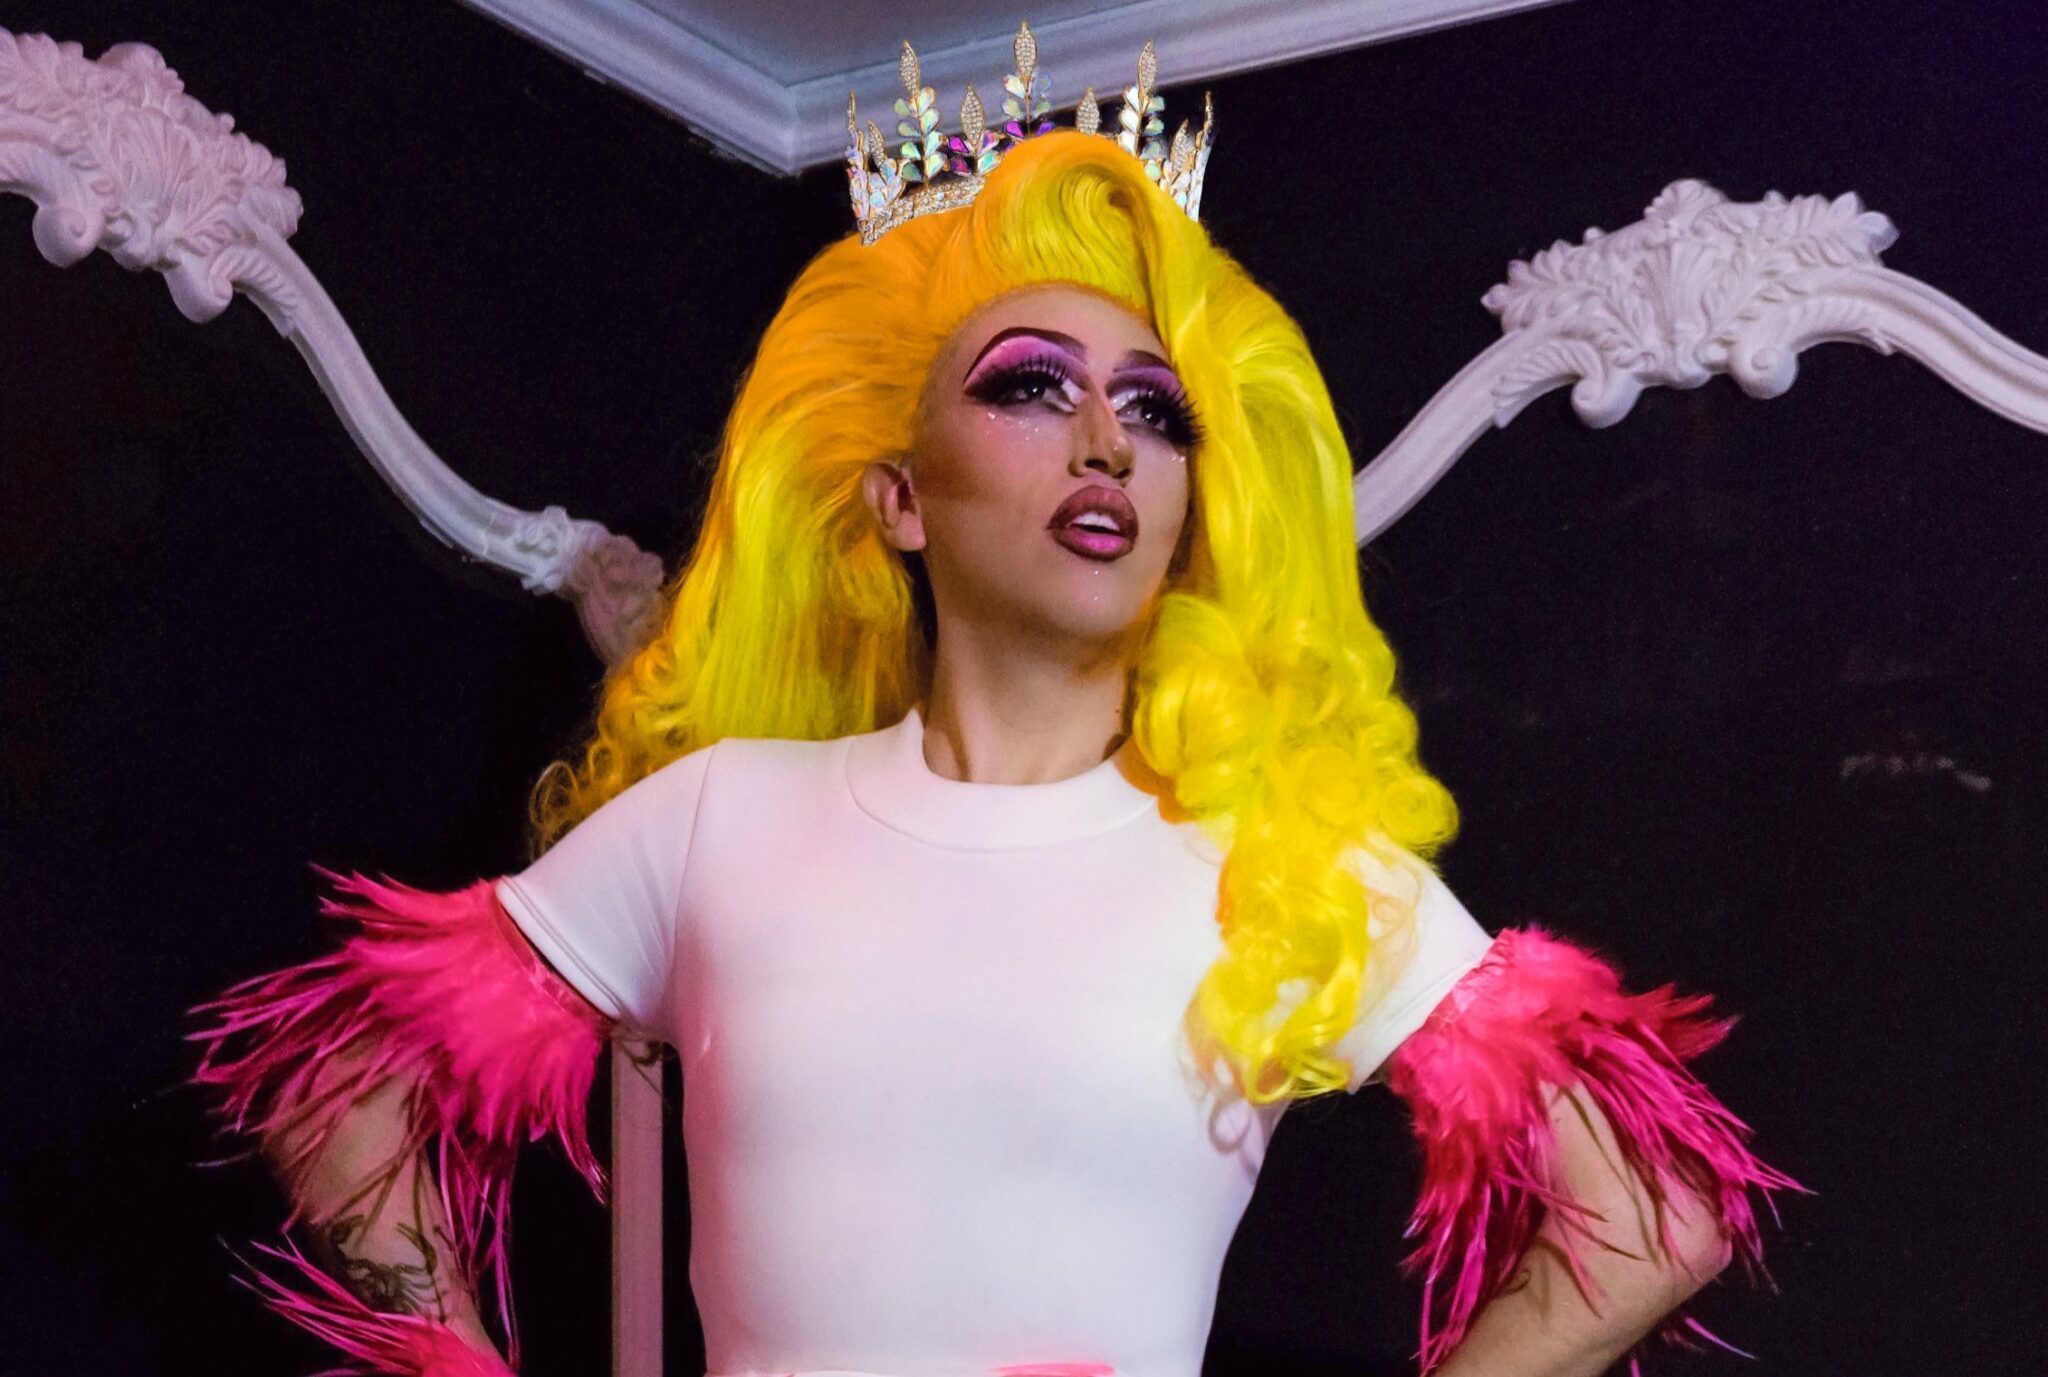 A drag queen wearing a bright yellow wig and a white dress with pink feather sleeves.